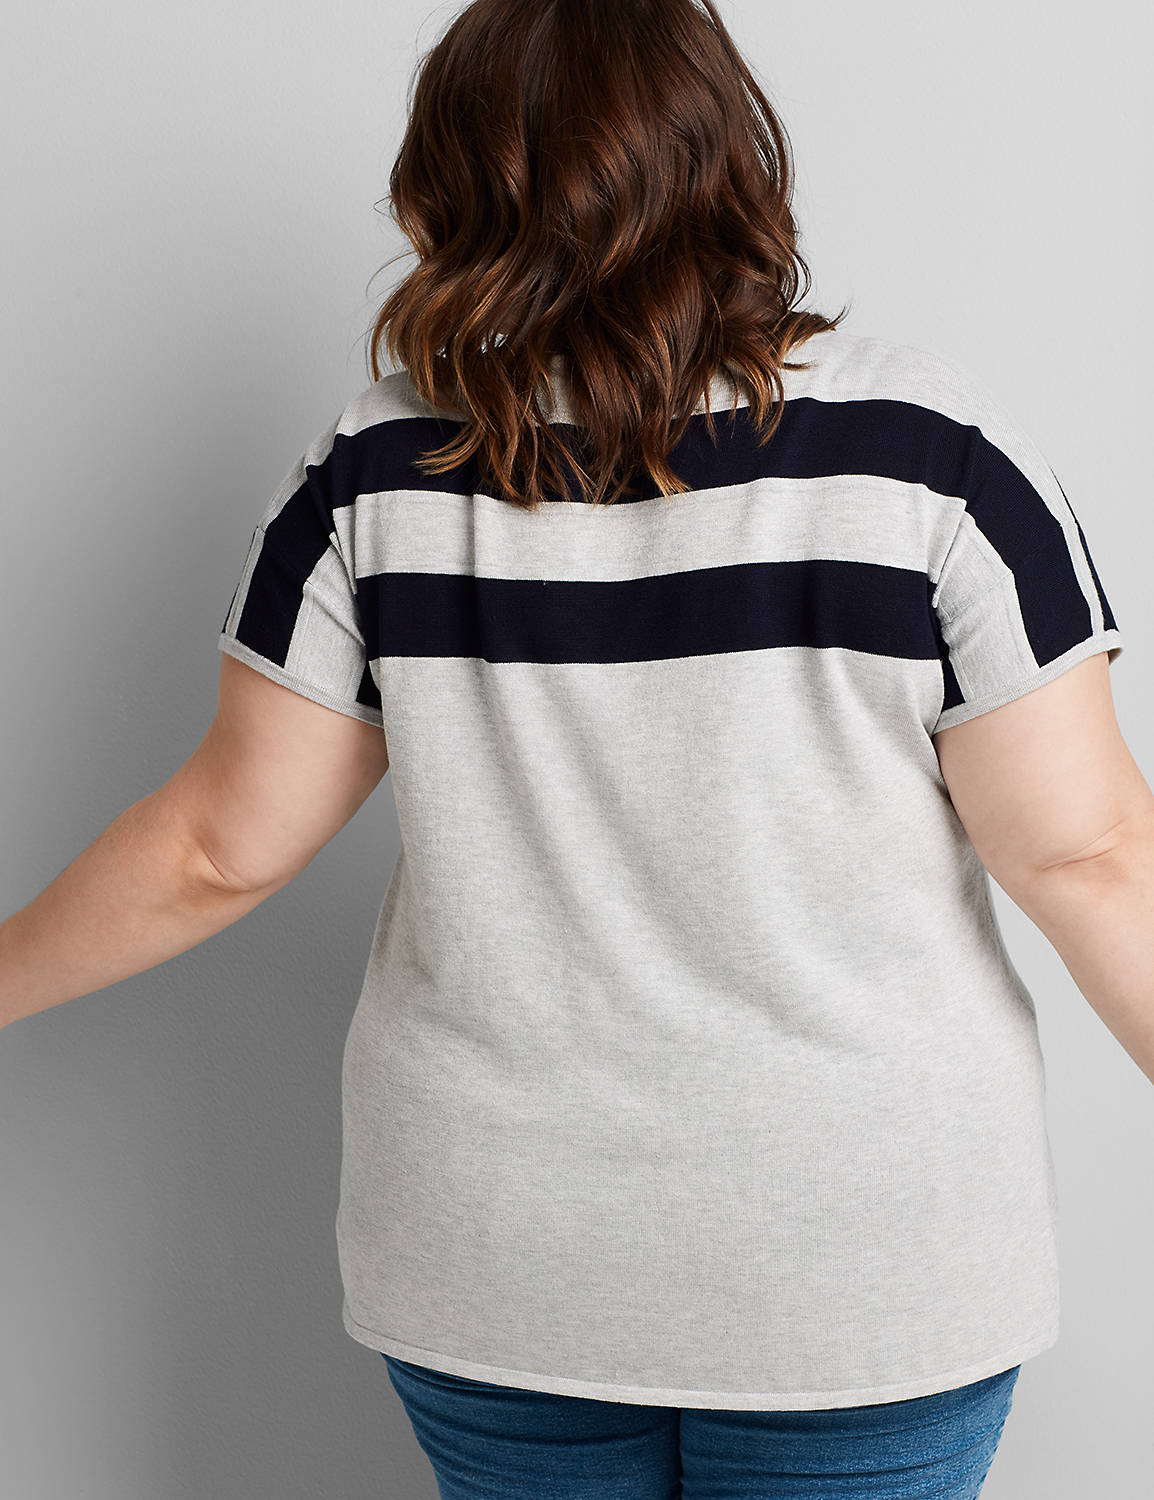 Short Sleeve Boatneck Sweater with Placement Stripe 1116469:BC03 Light Grey Heather:10/12 Product Image 2